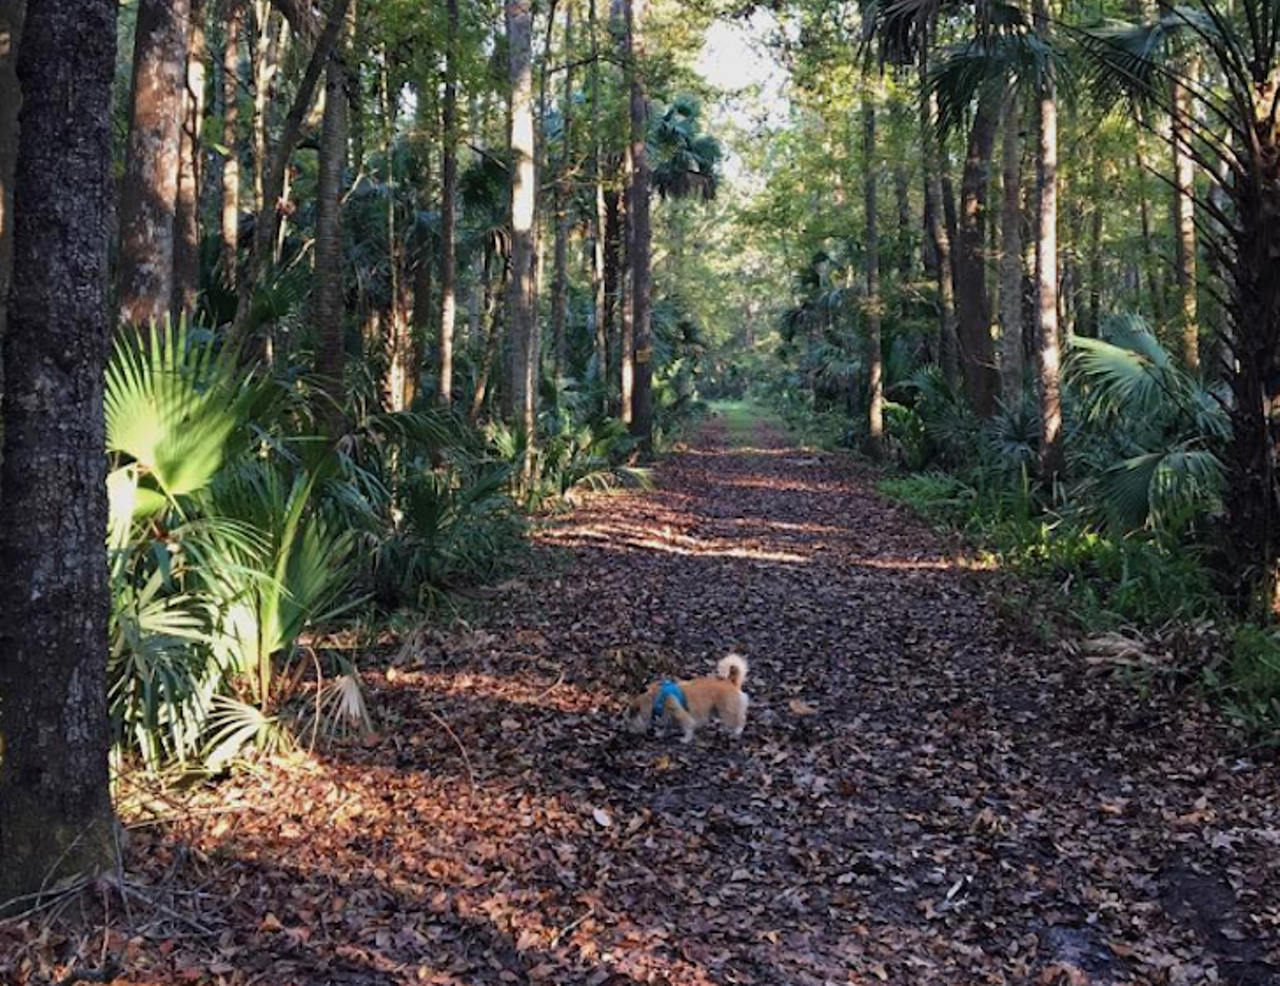 Sabal Point Sanctuary
8300 FL-46, Sanford, FL 32771
This seven-mile shaded corridor follows an old logging tramway right through the heart of a 2,500-acre floodplain forest.
Photo via perryfrance/Instagram